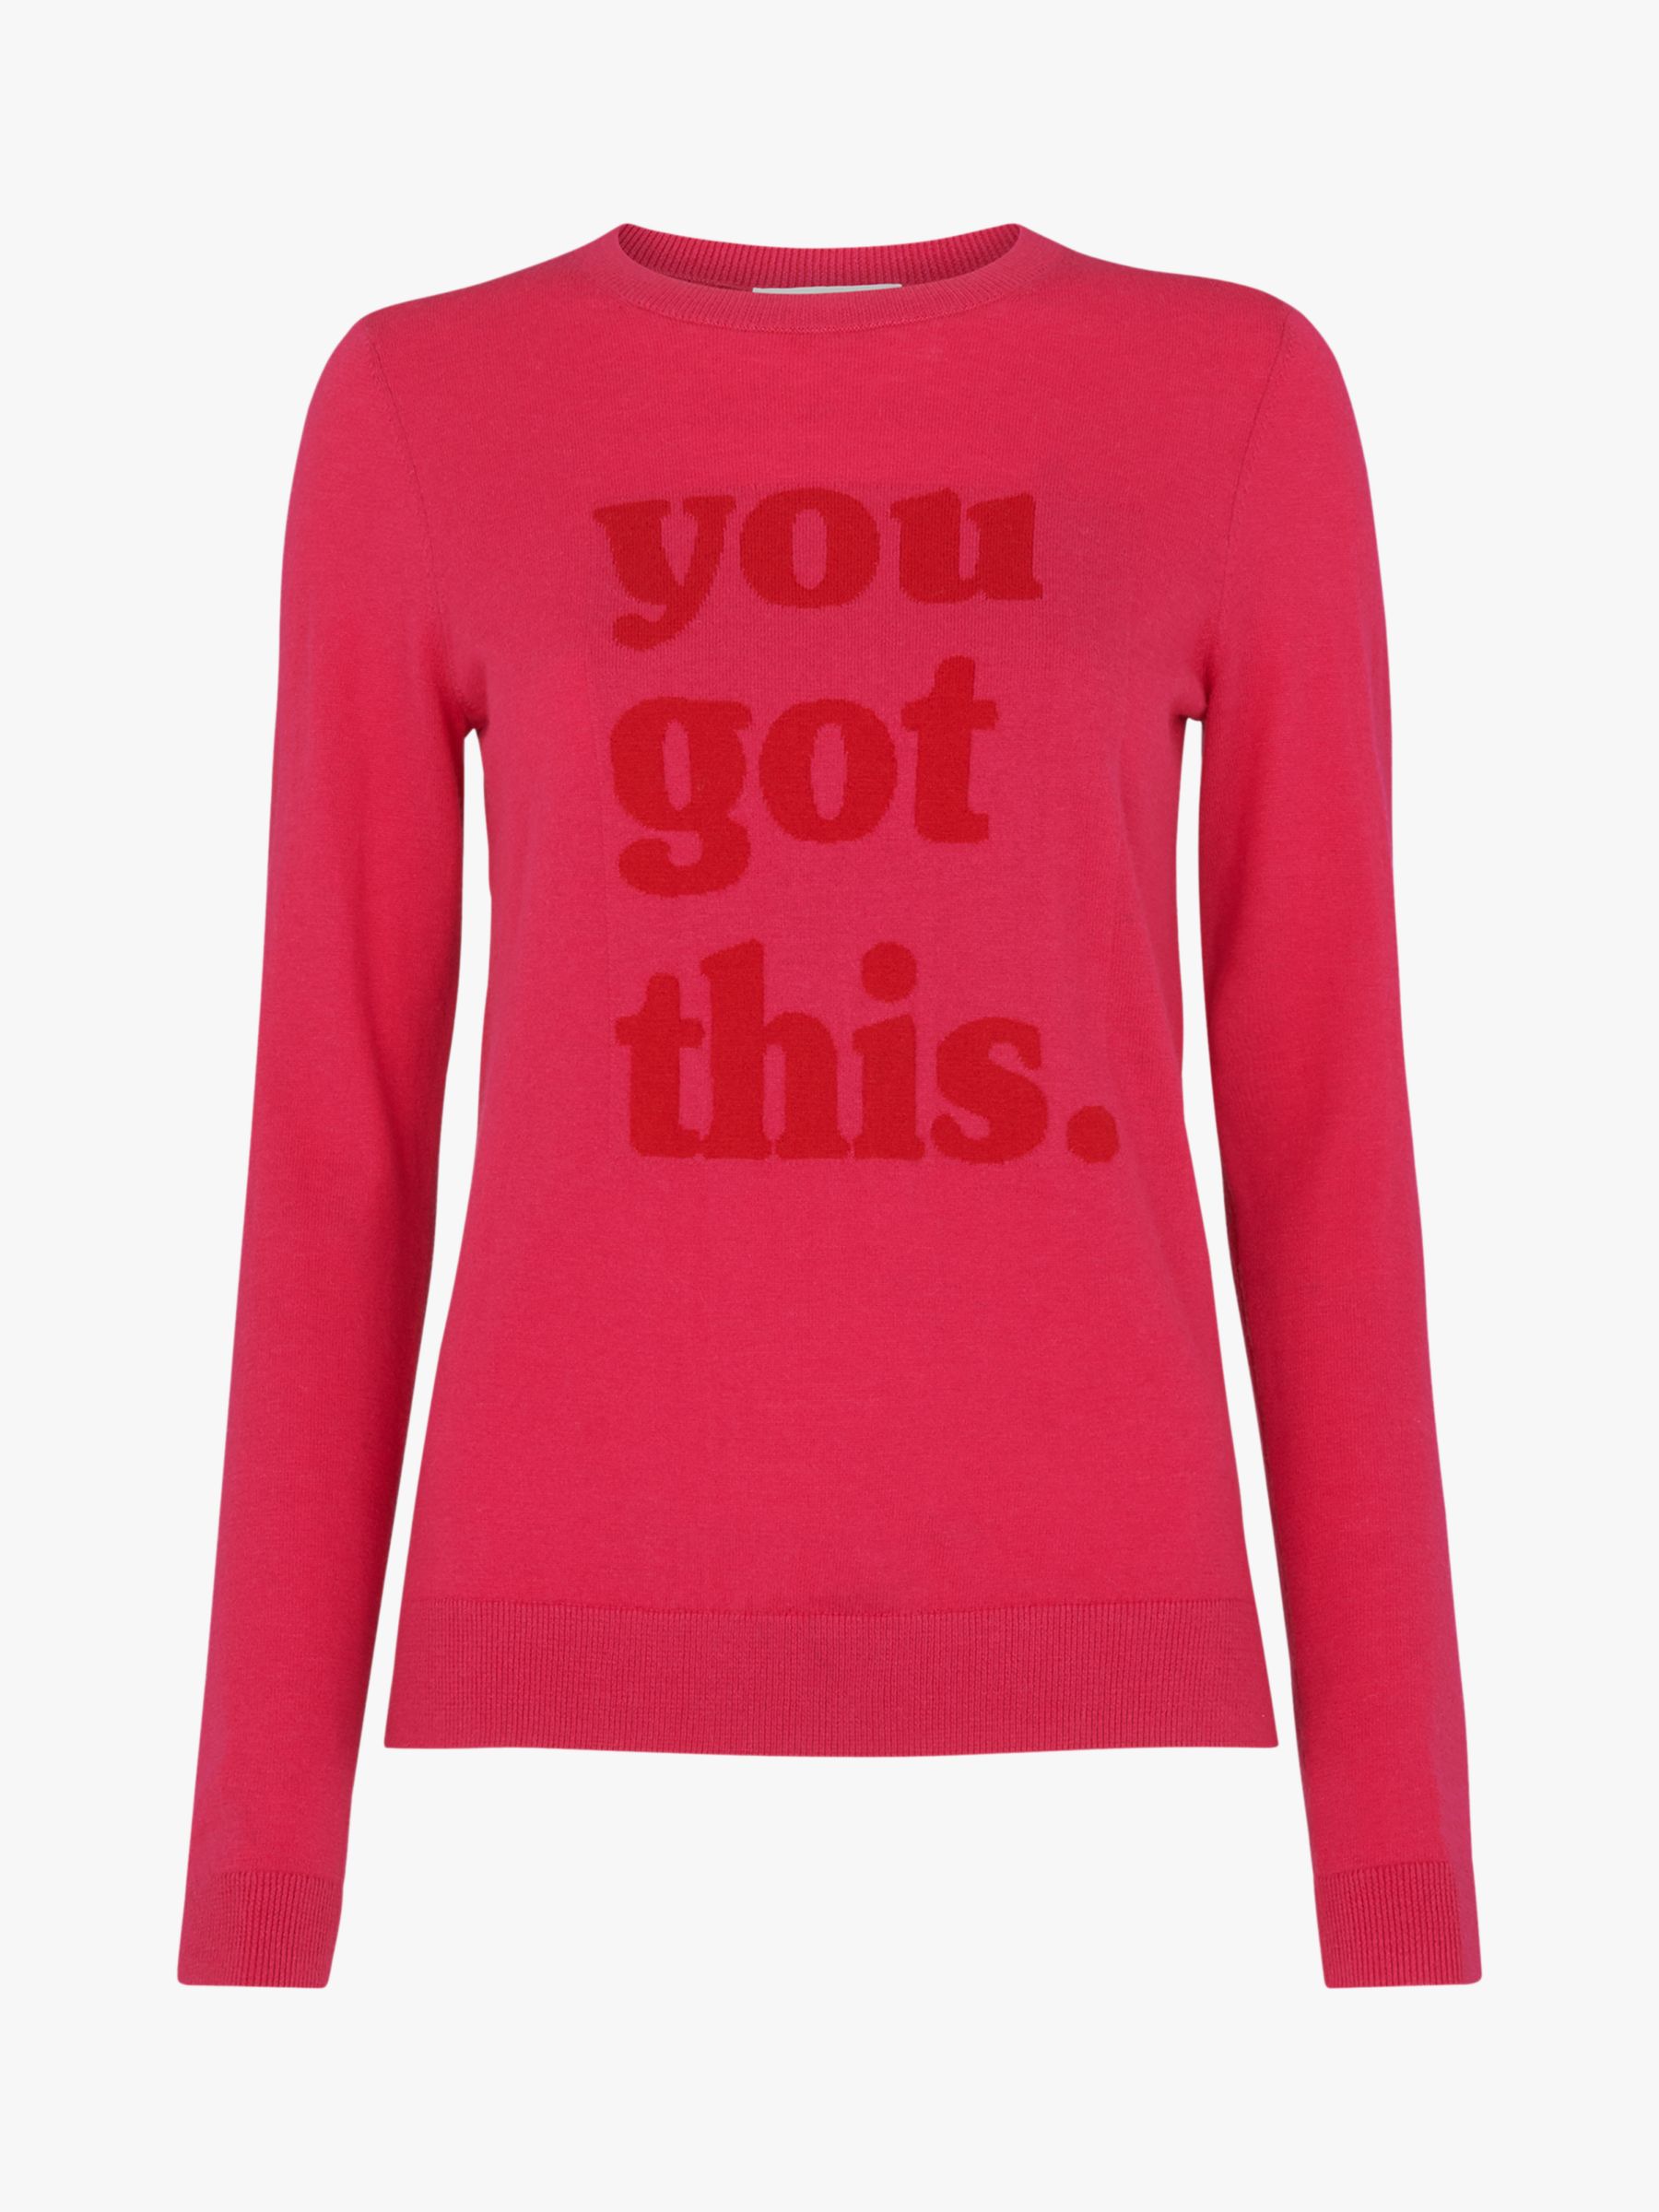 Whistles You Got This Knit Jumper, Pink